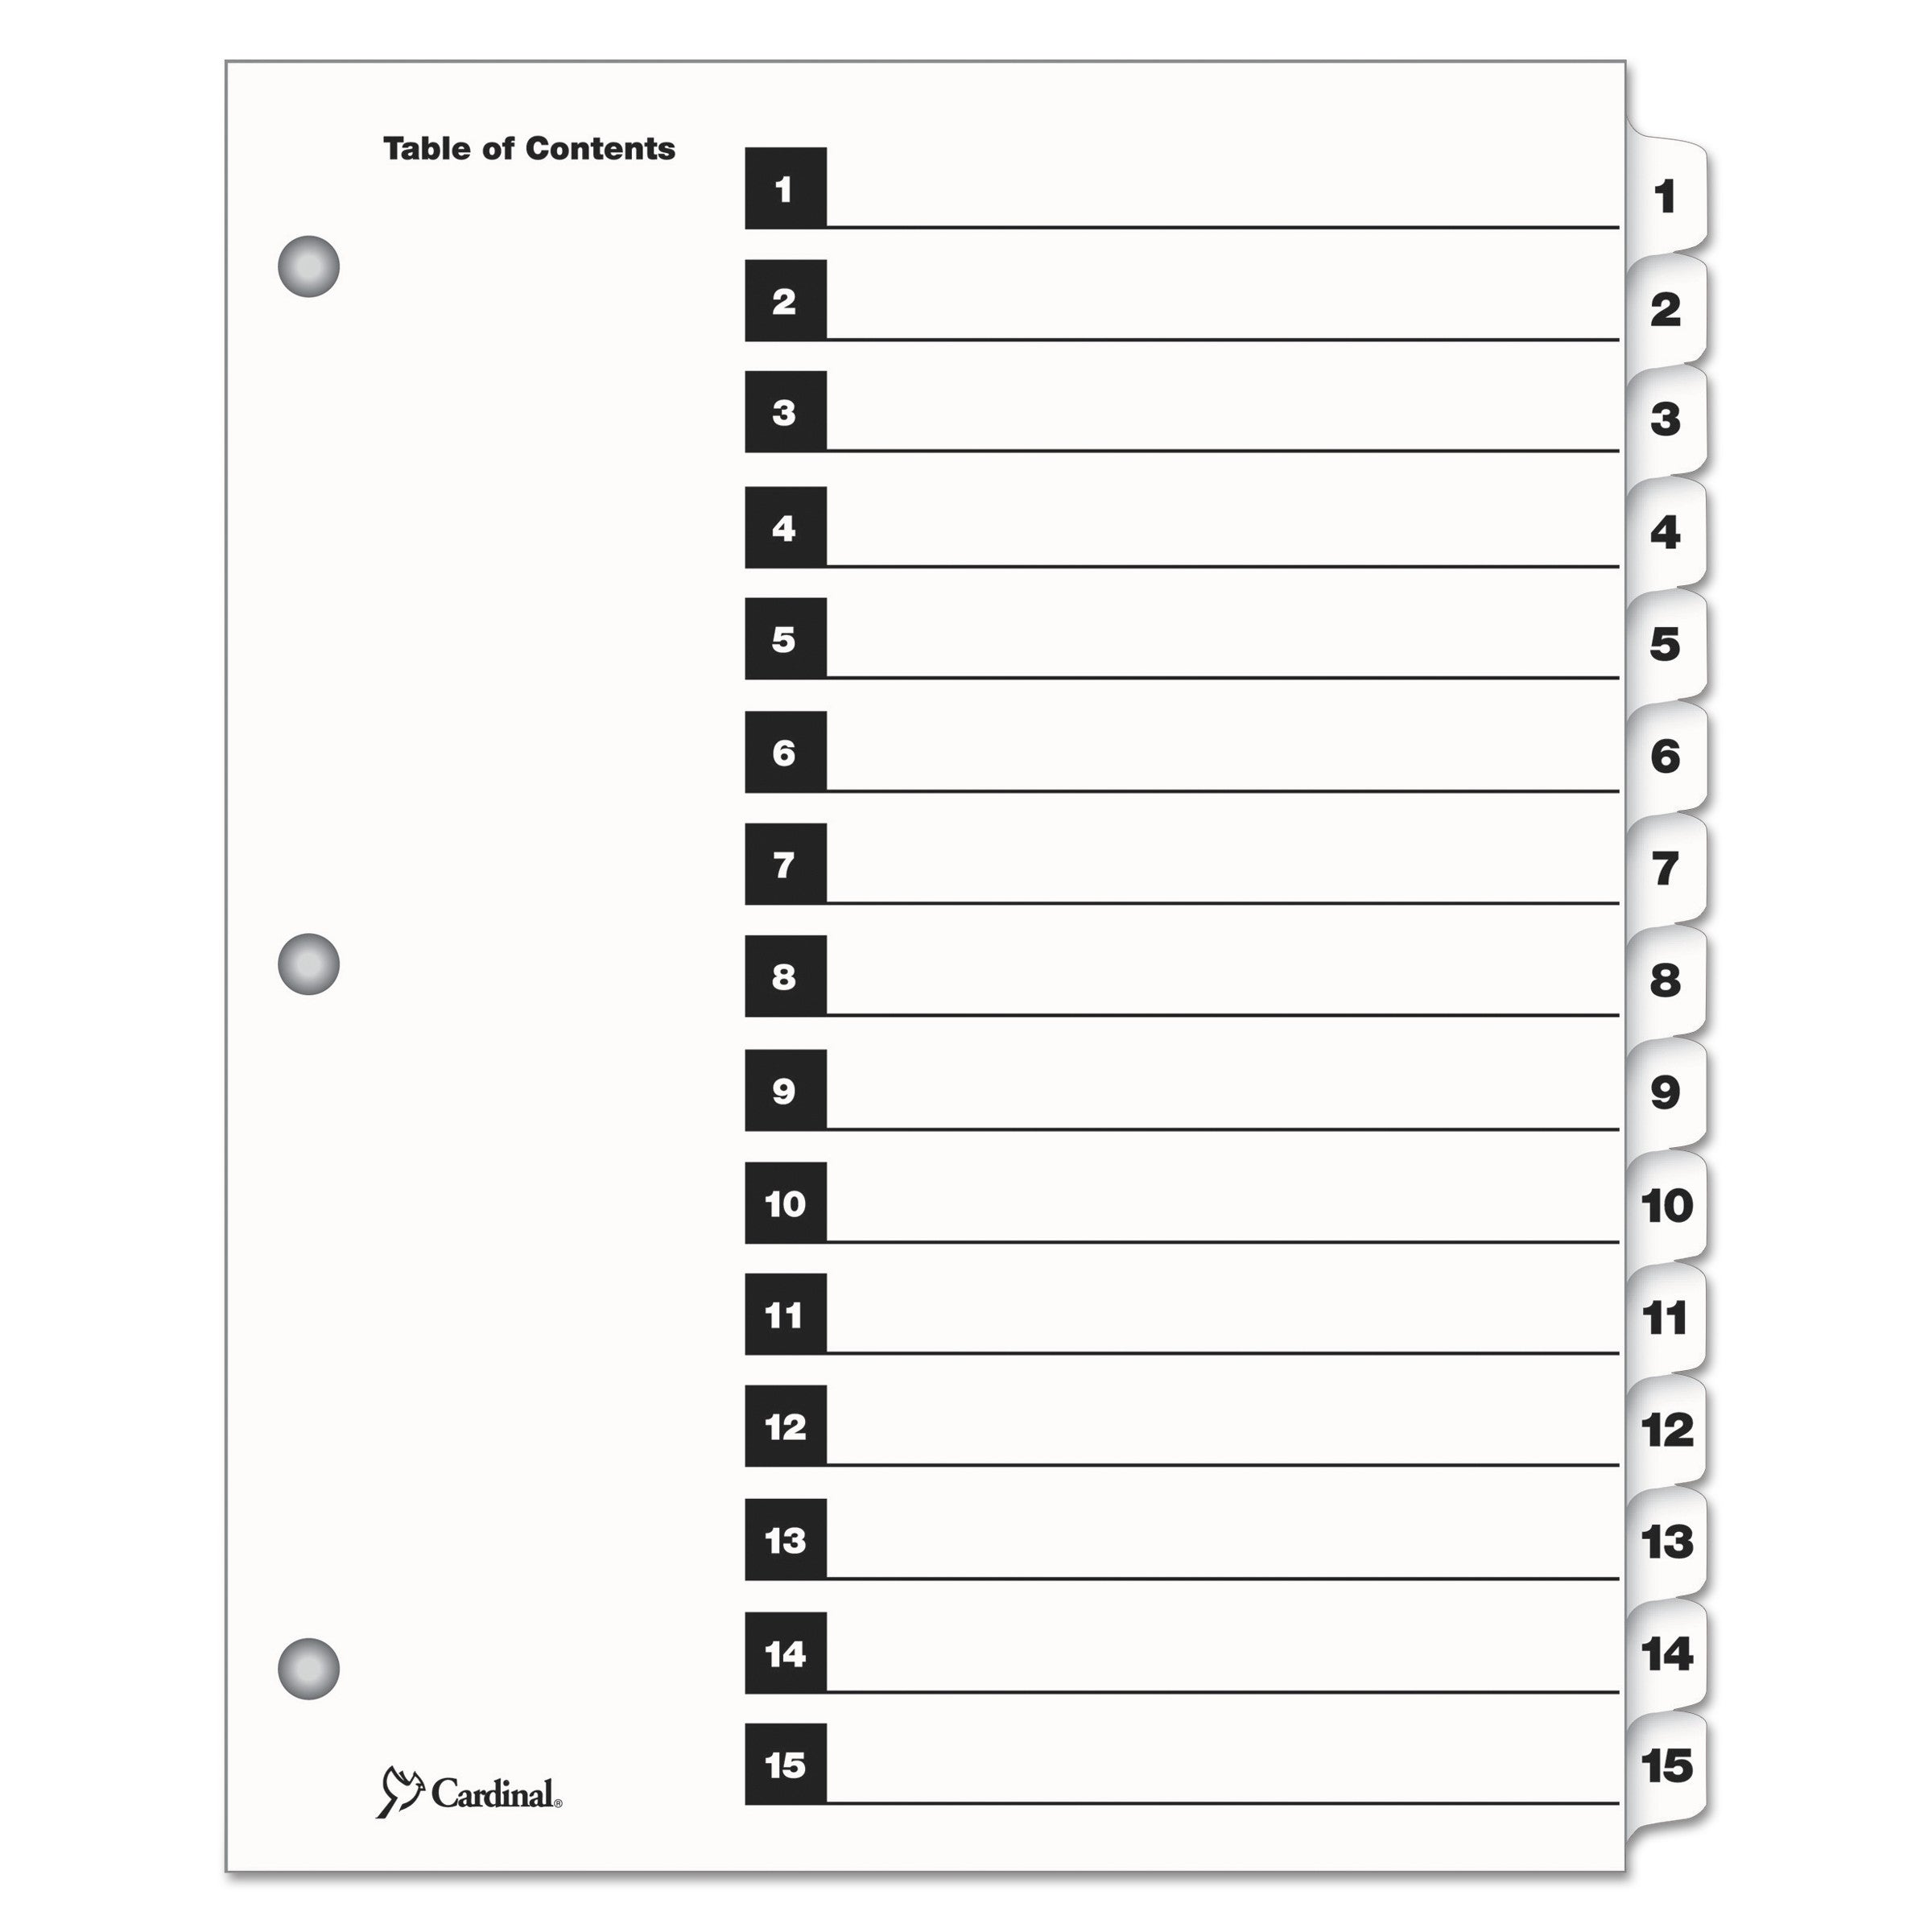 OneStep Printable Table of Contents and Dividers, 15-Tab, 1 to 15, 11 x 8.5, White, White Tabs, 1 Set - 